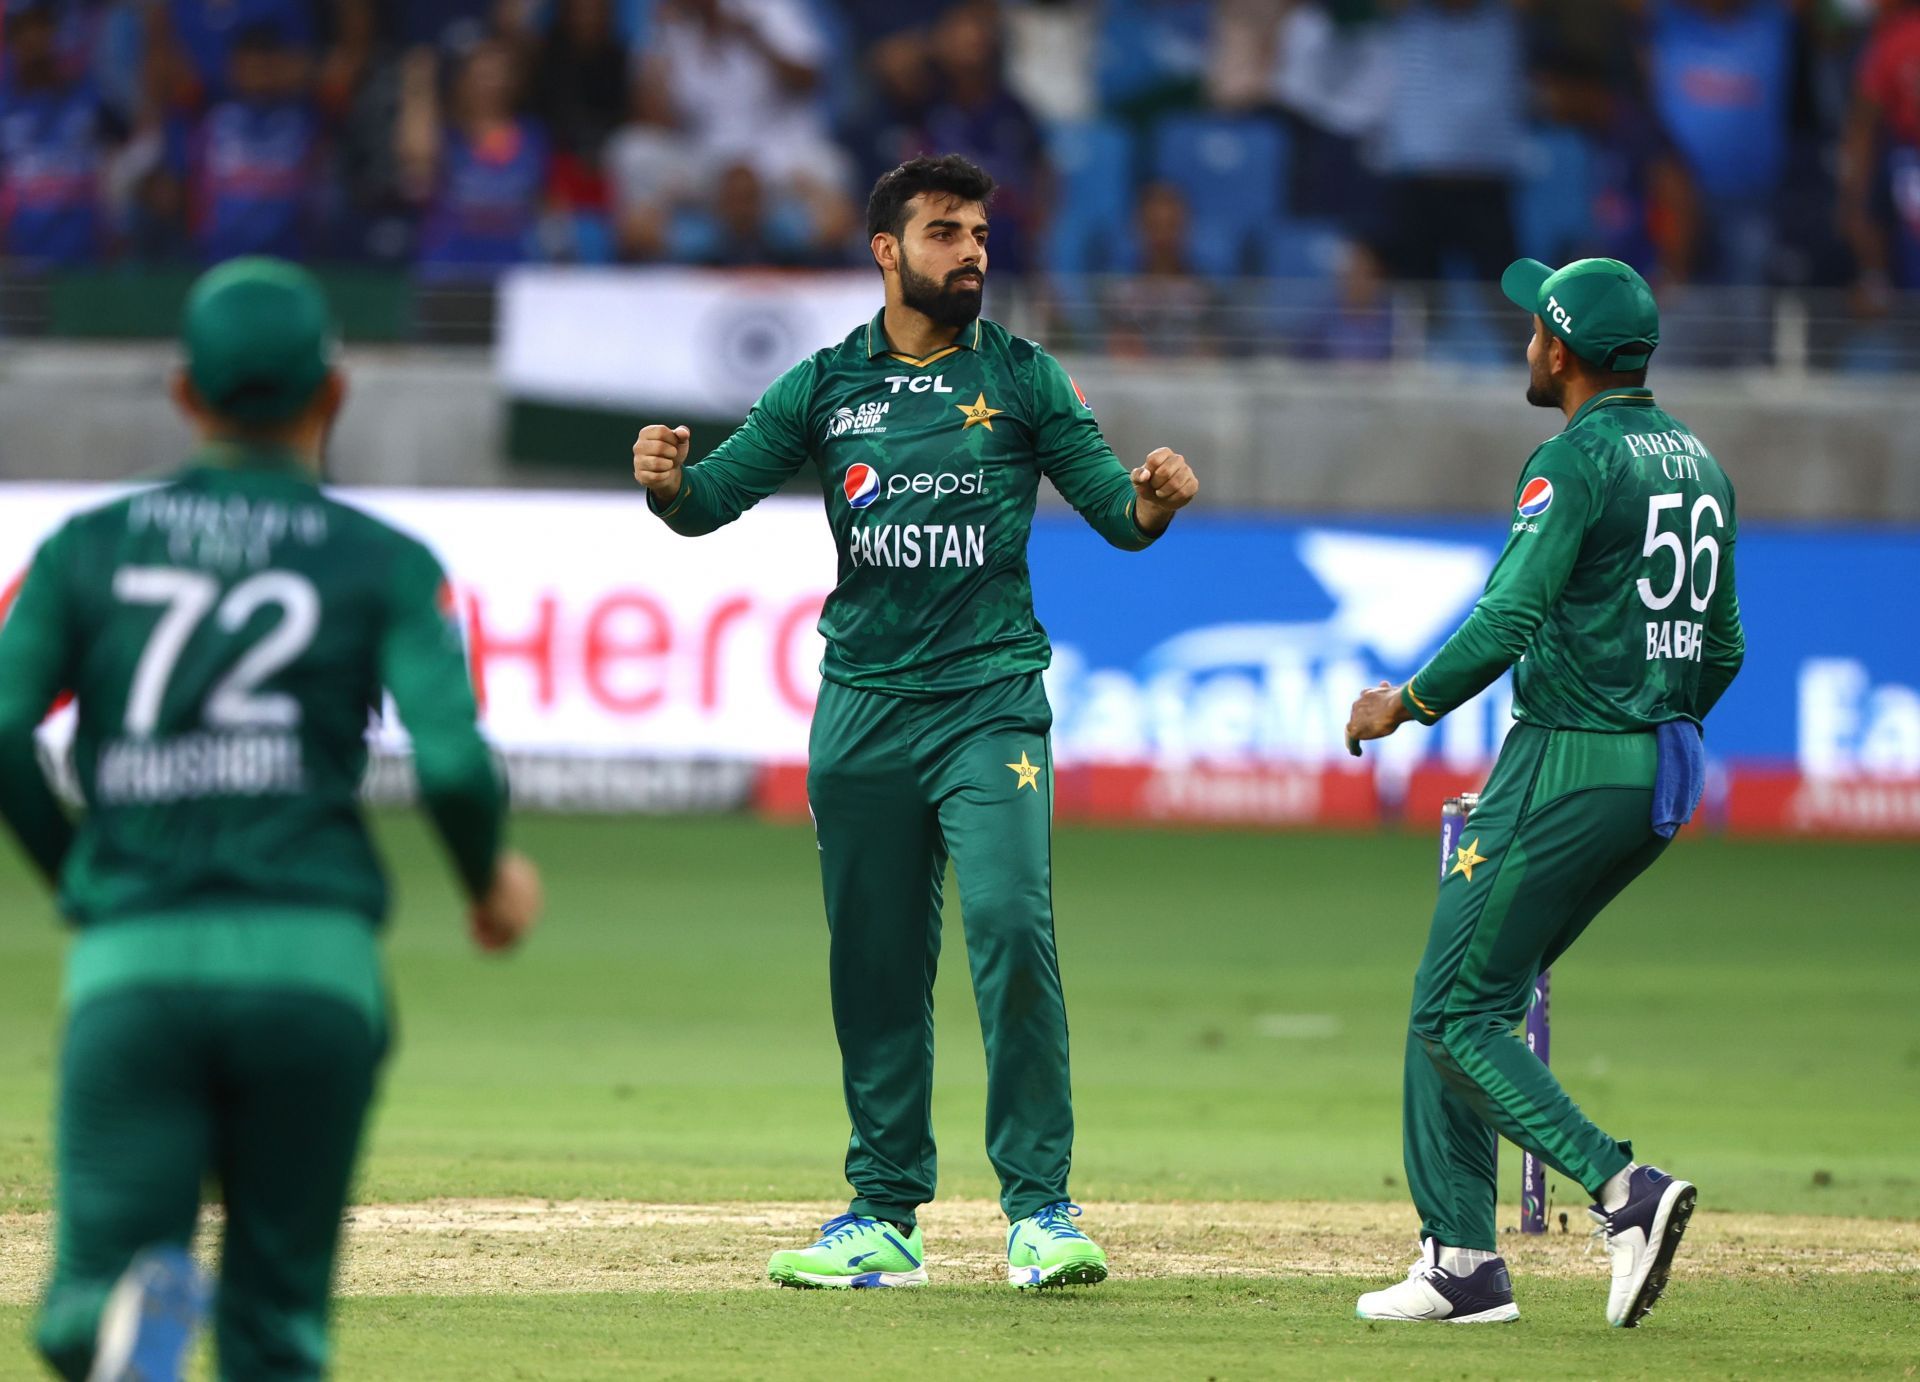 Shadab Khan bagged two crucial wickets in the Asia Cup 2022 Super Fours match. (Image: Getty)